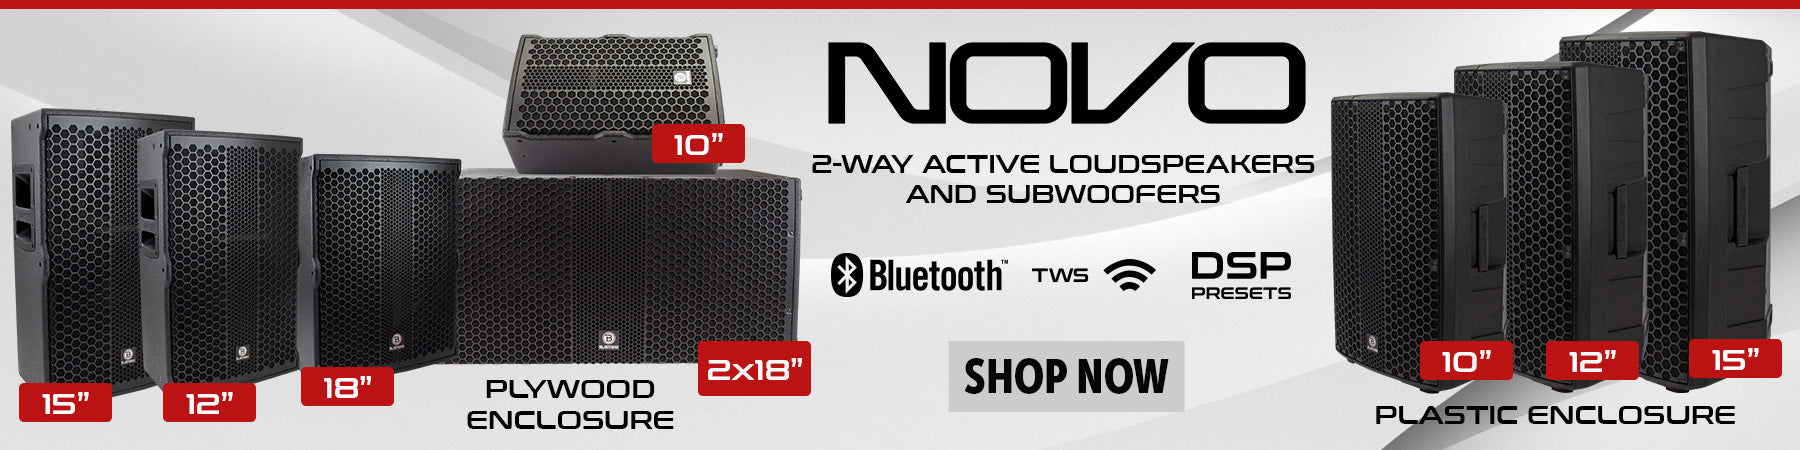 Novo Active Speakers and Subwoofers